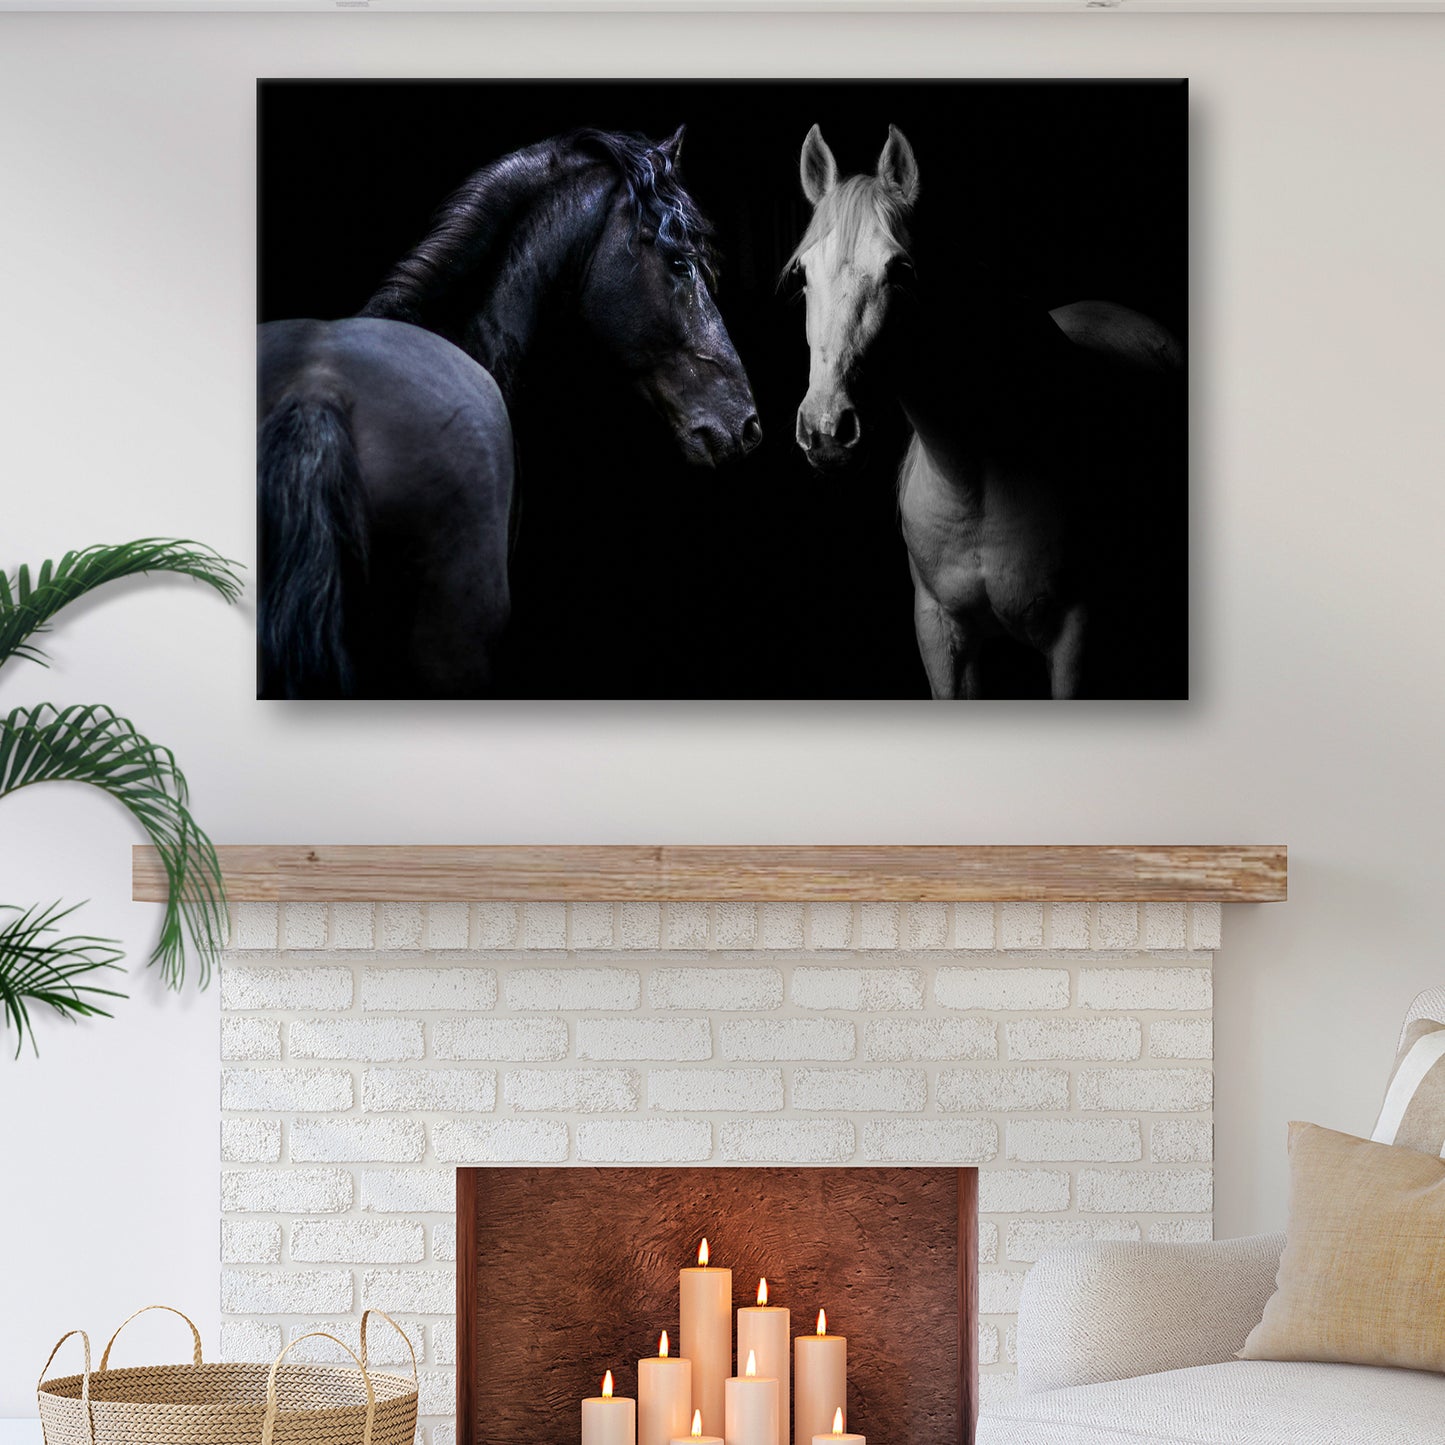 Dark And Light Horse Canvas Wall Art - Image by Tailored Canvases